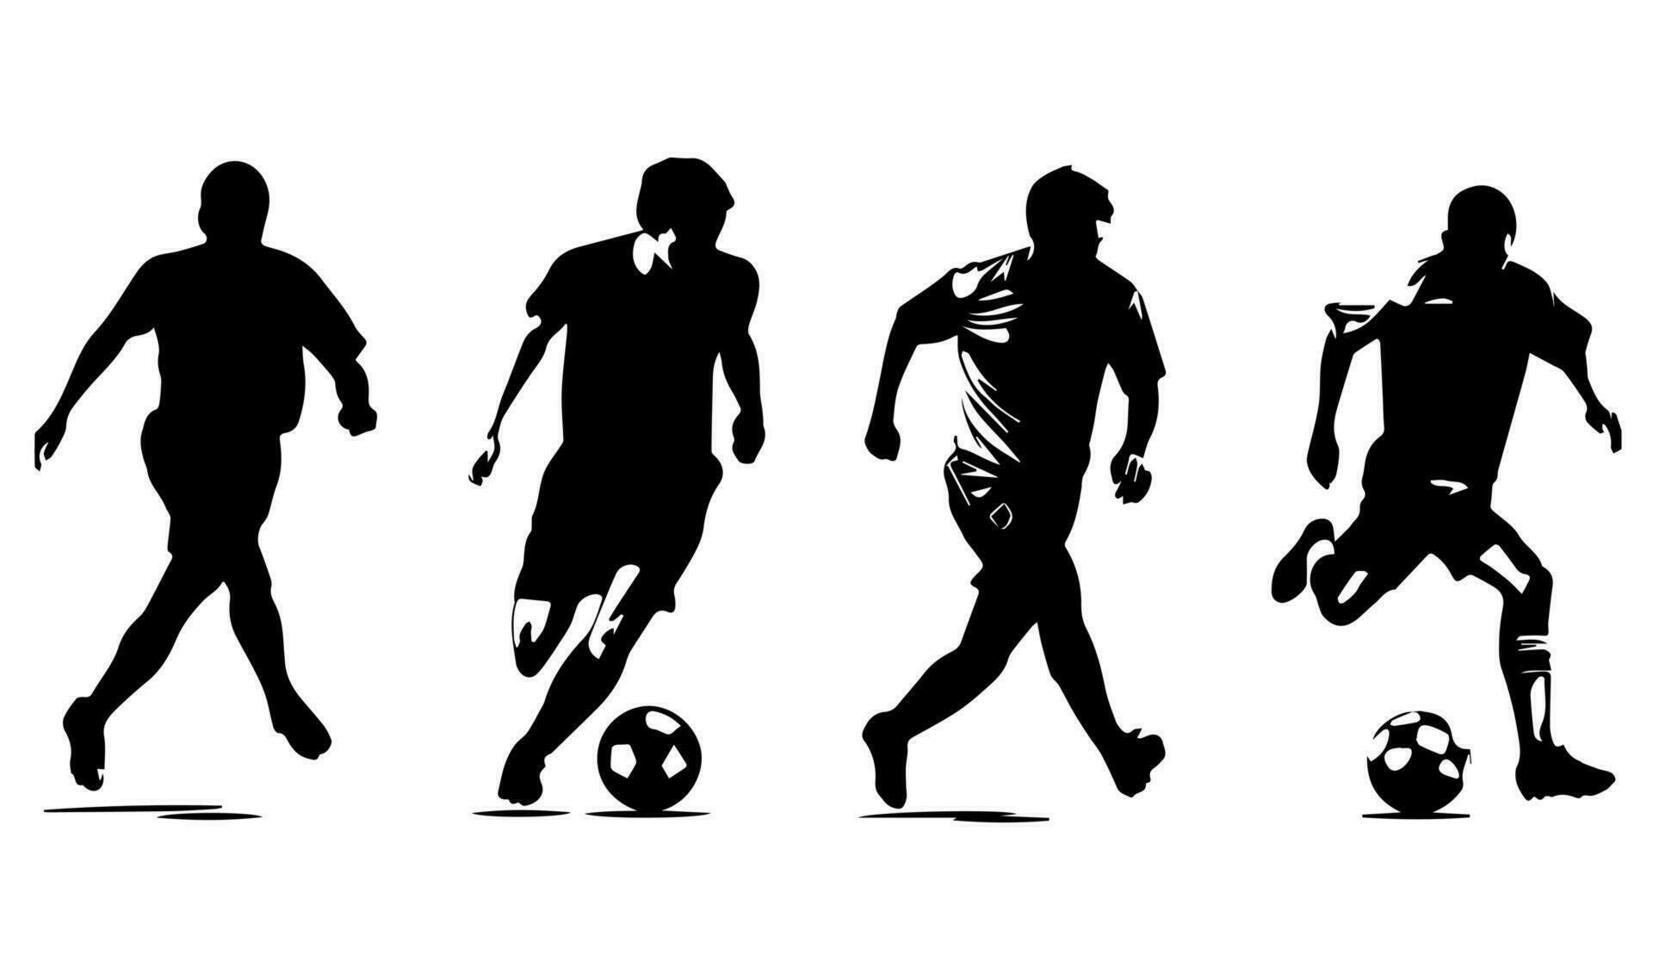 Silhouettes of soccer players on white background. Vector illustration.